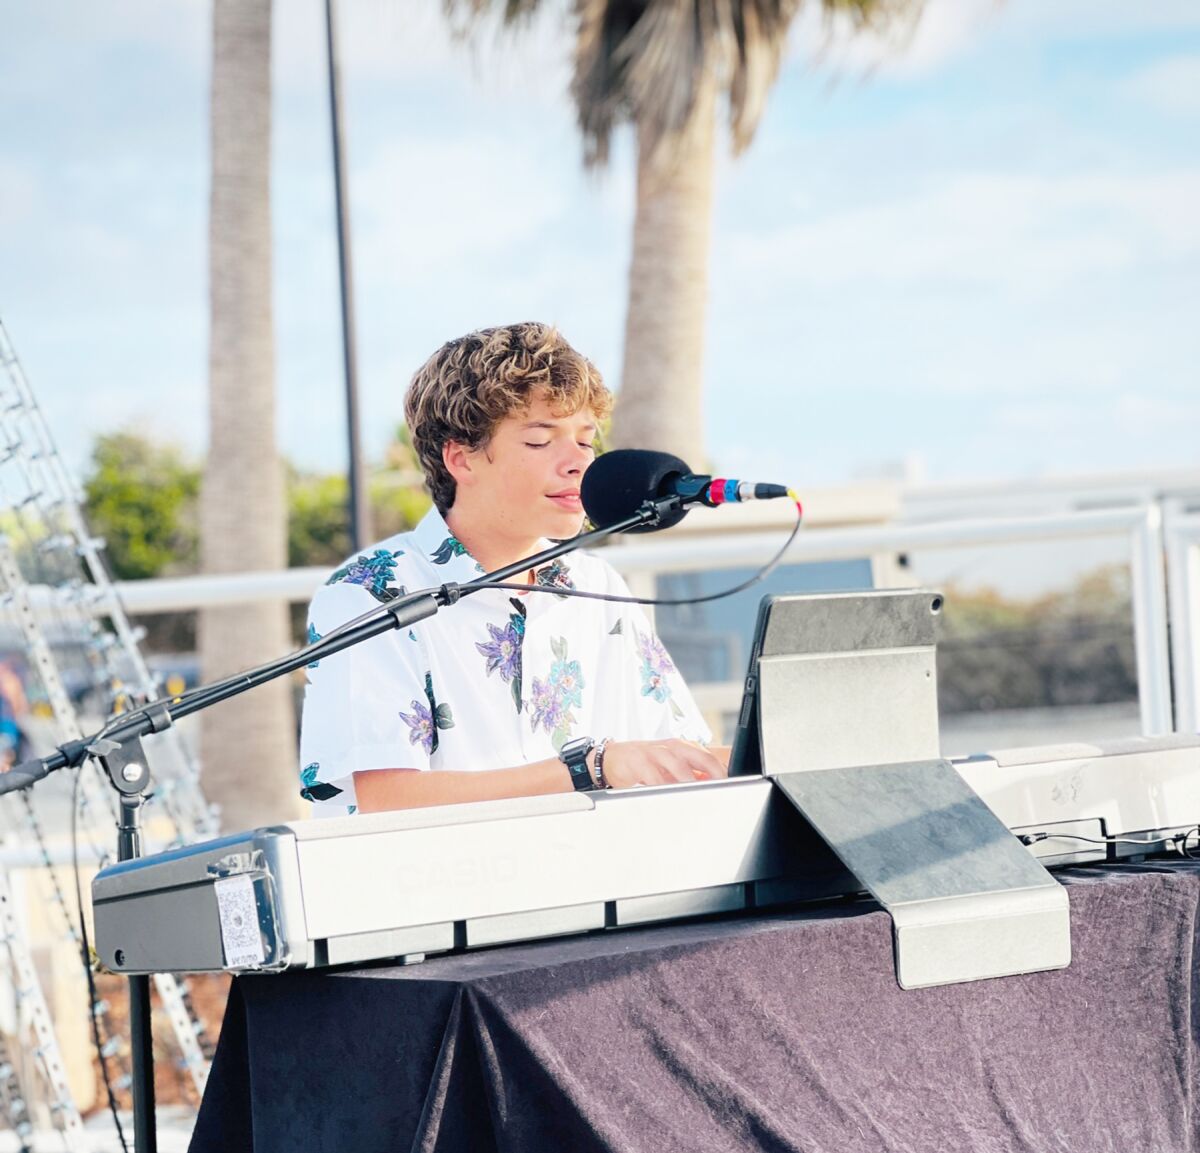 One of Pacific Beach’s own honored as a ‘Most Remarkable Teen’